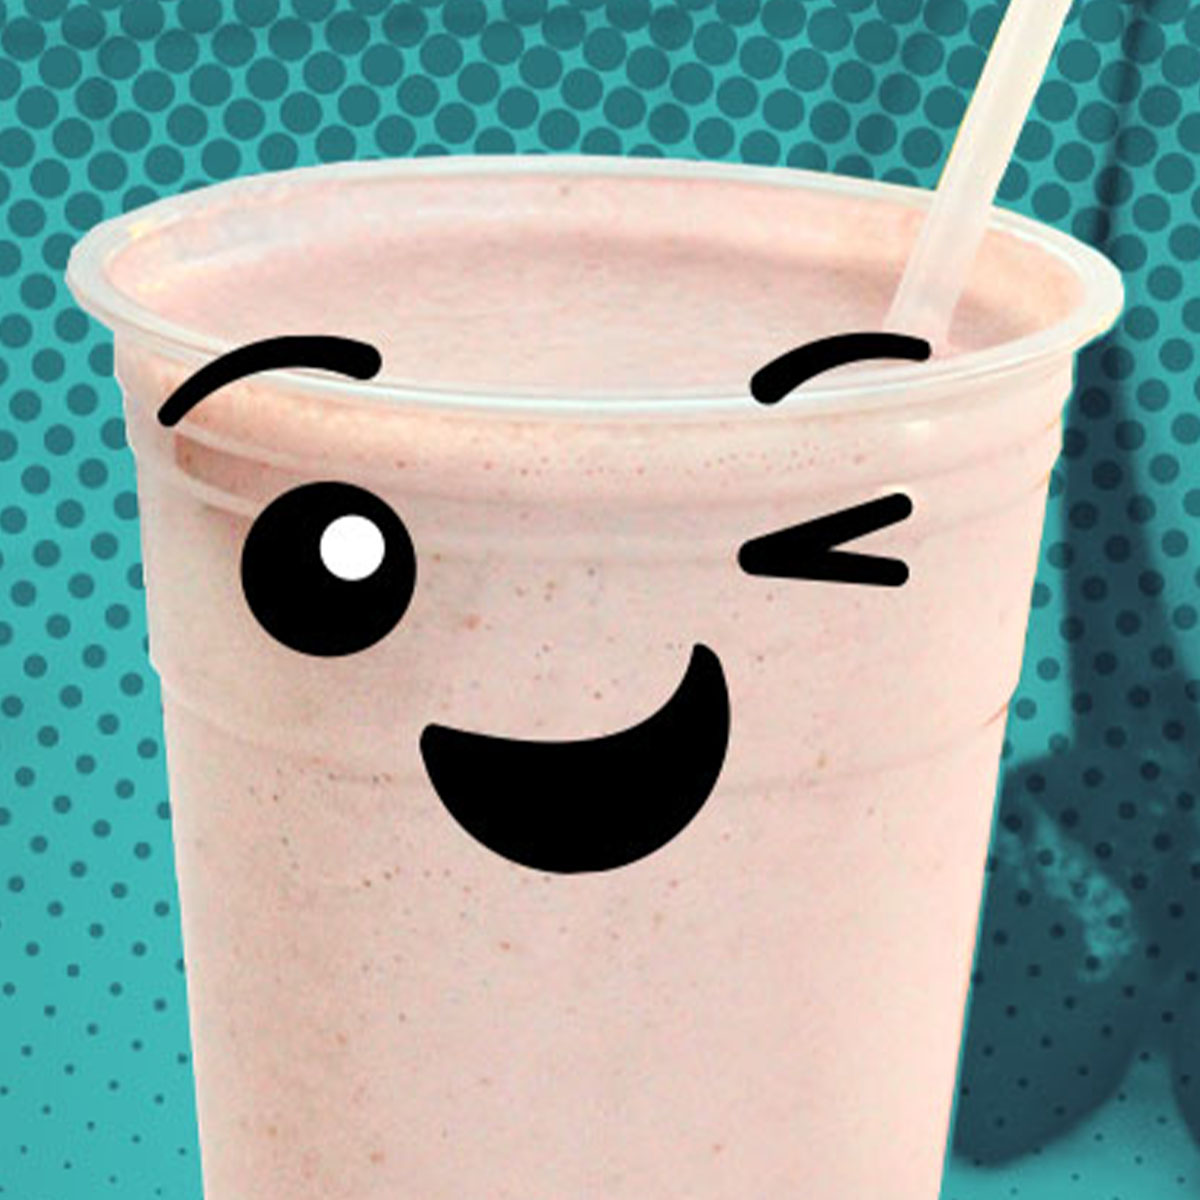 A smoothie with a winking face.